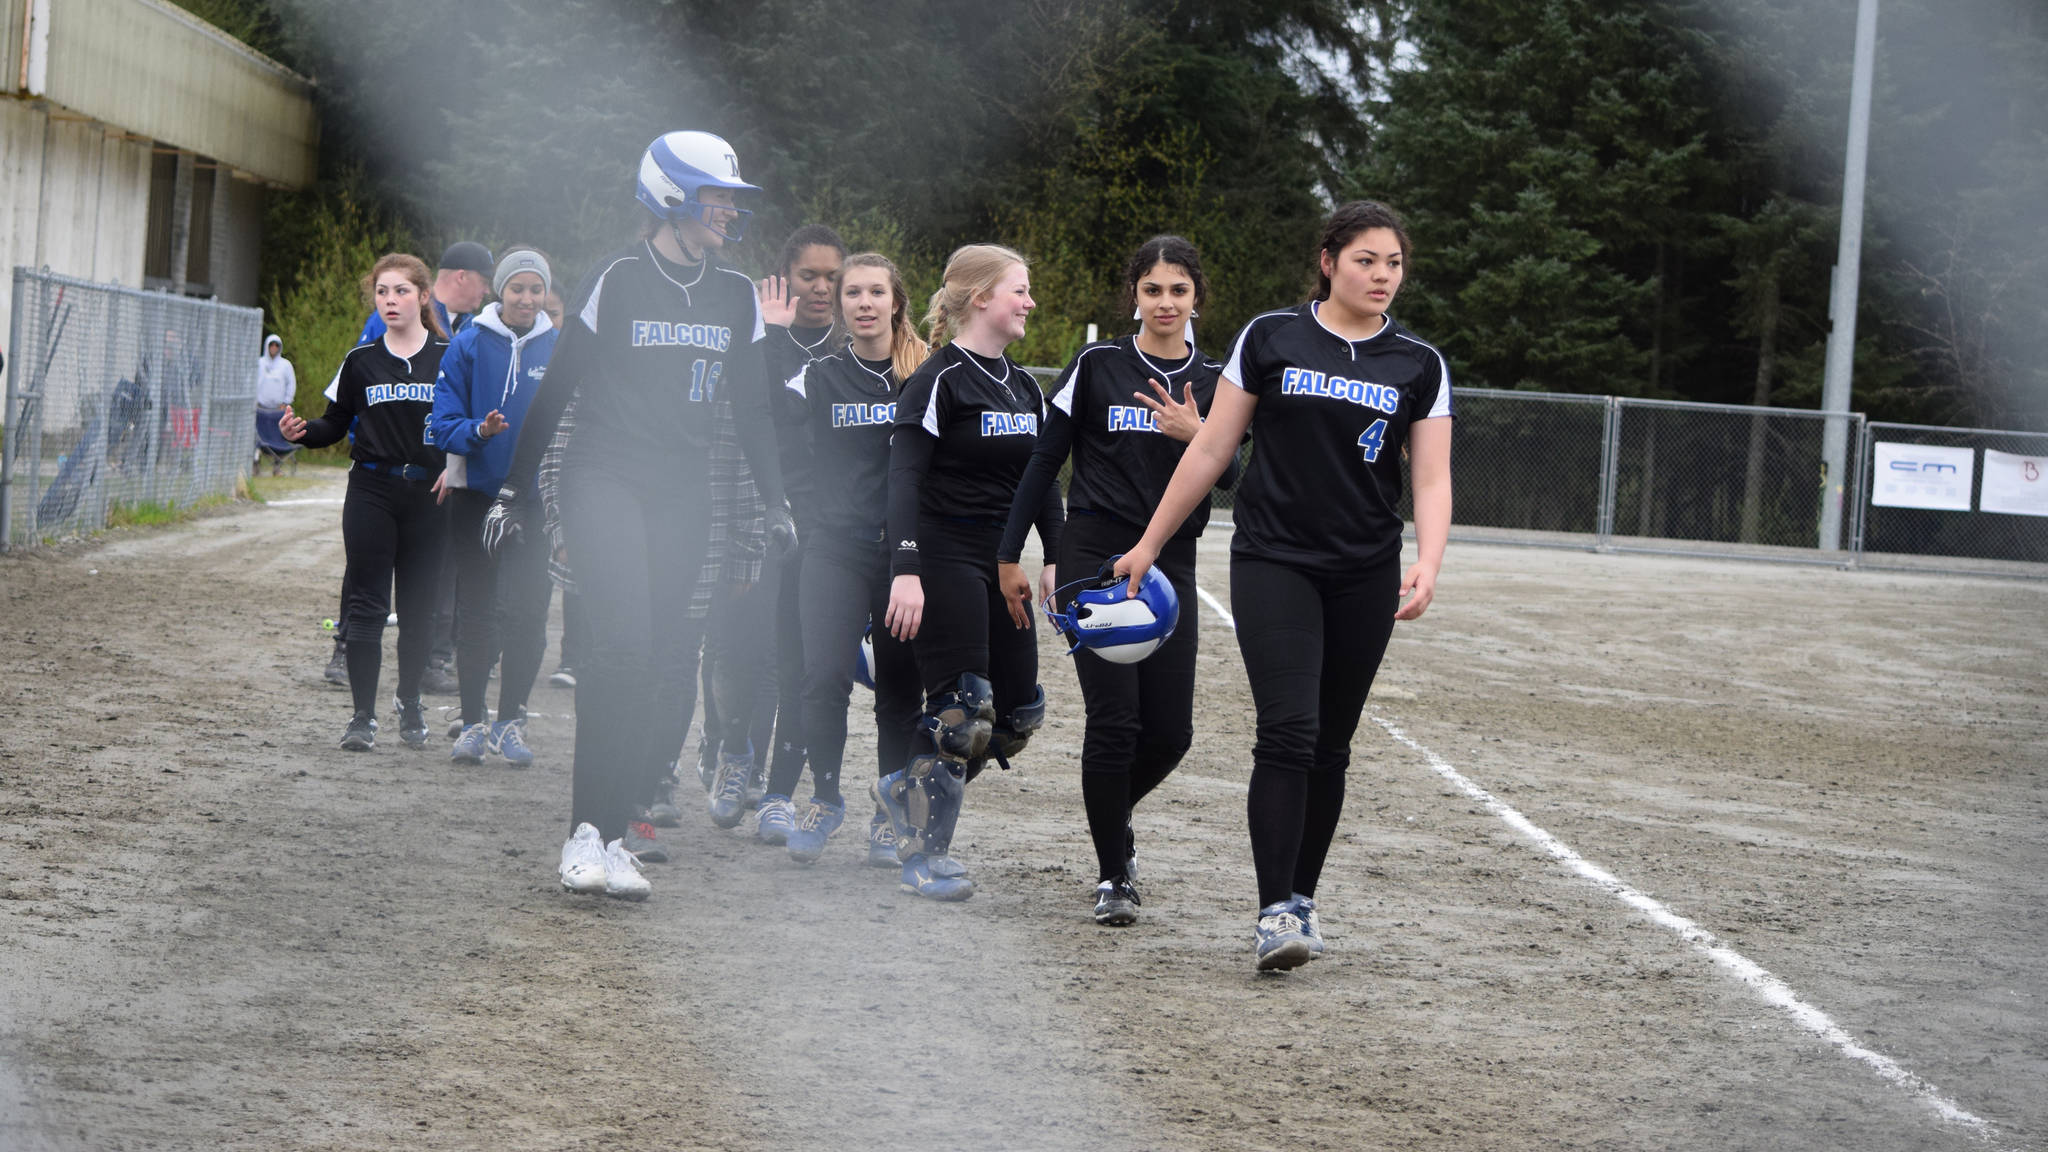 The Thunder Mountain High School softball team forms a handshake line after Saturday morning’s 8-0 win over Sitka. (Nolin Ainsworth | Juneau Empire)